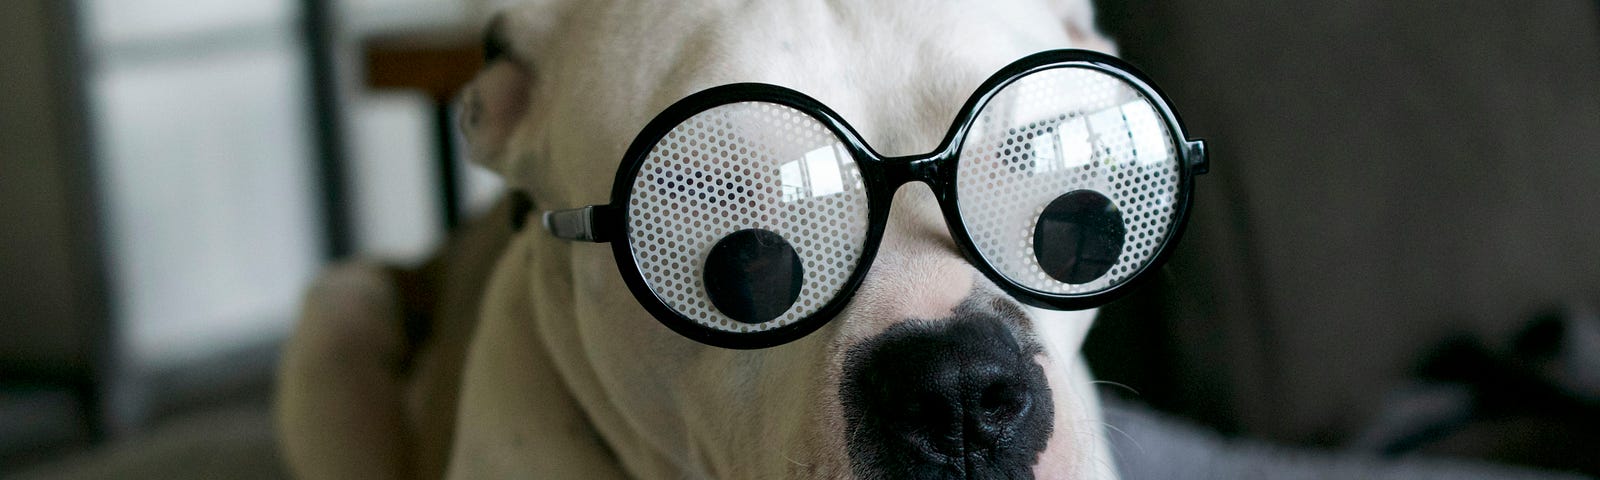 Dog wearing silly glasses, looking surprised.